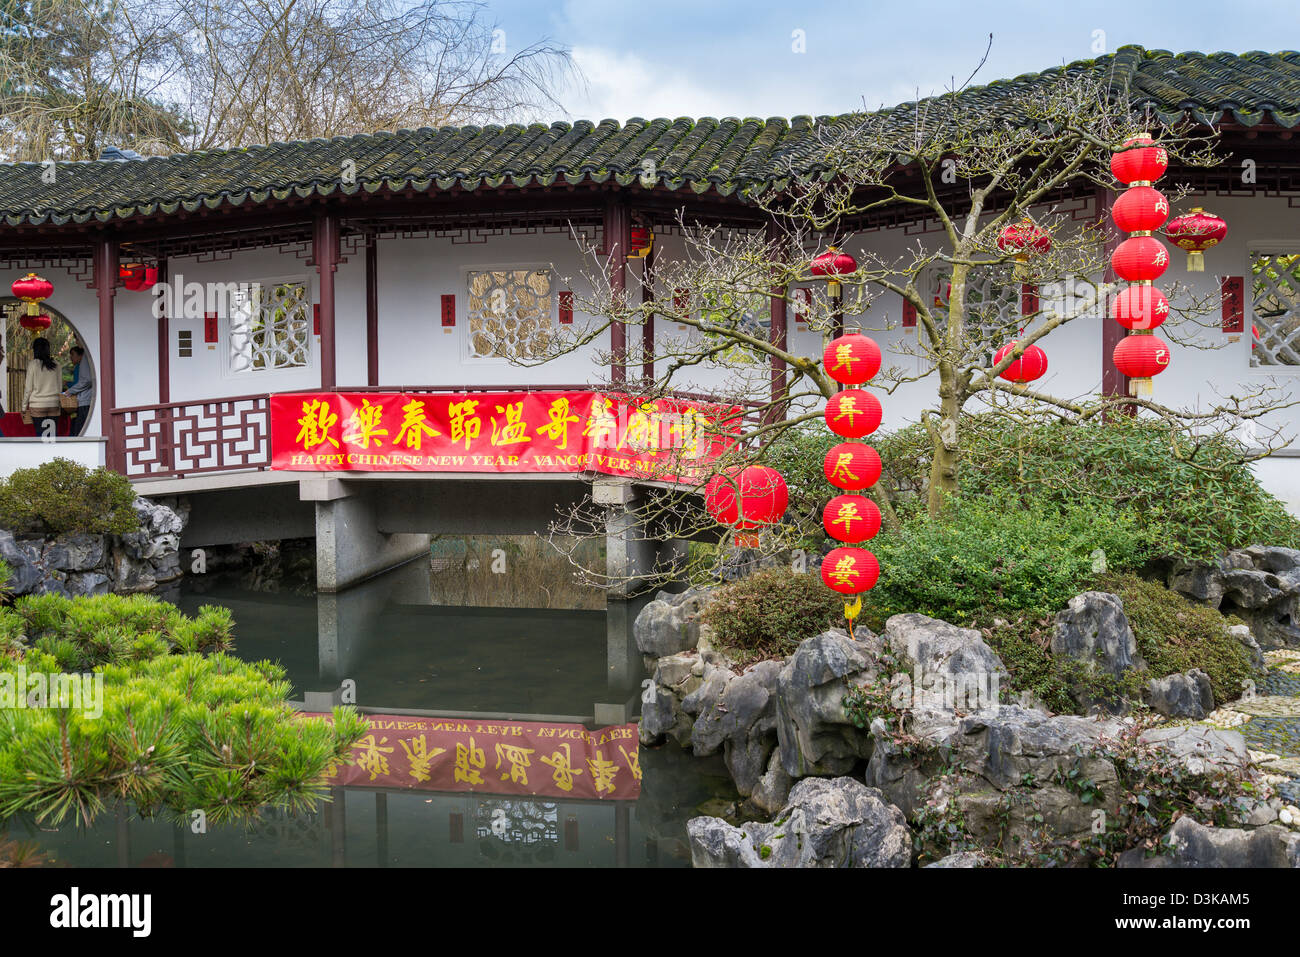 Red lanterns decorate, Dr Sun Yat Sen Garden for Chinese New Year, Chinatown, Vancouver, British Columbia, Canada Stock Photo